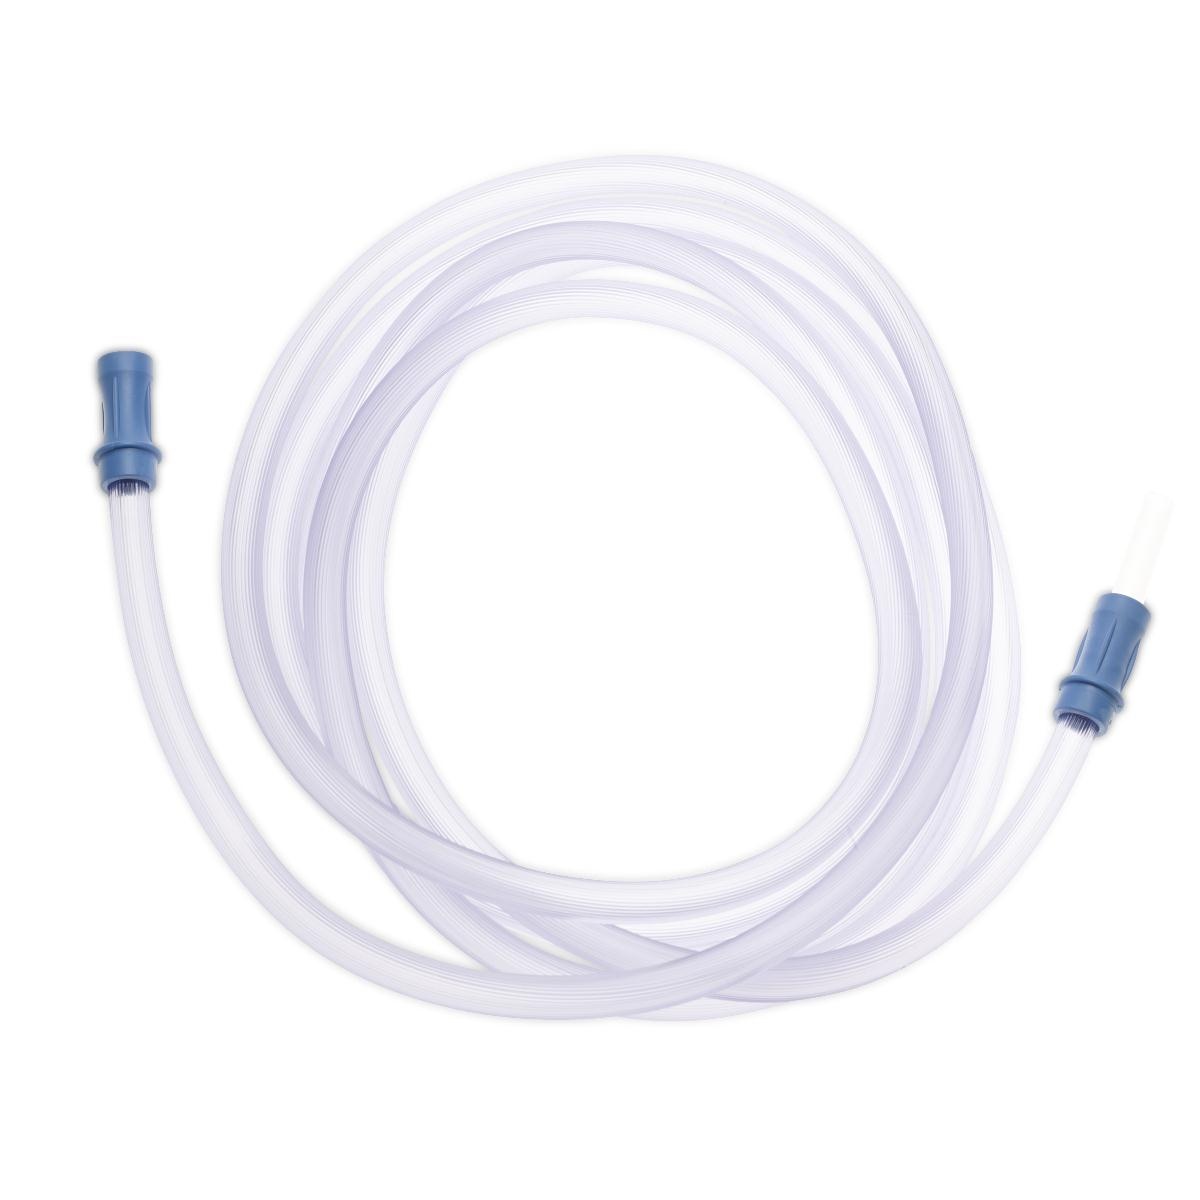 Medline Suction Tubing STERILE Non-Conductive 6mm x 3m - EACH